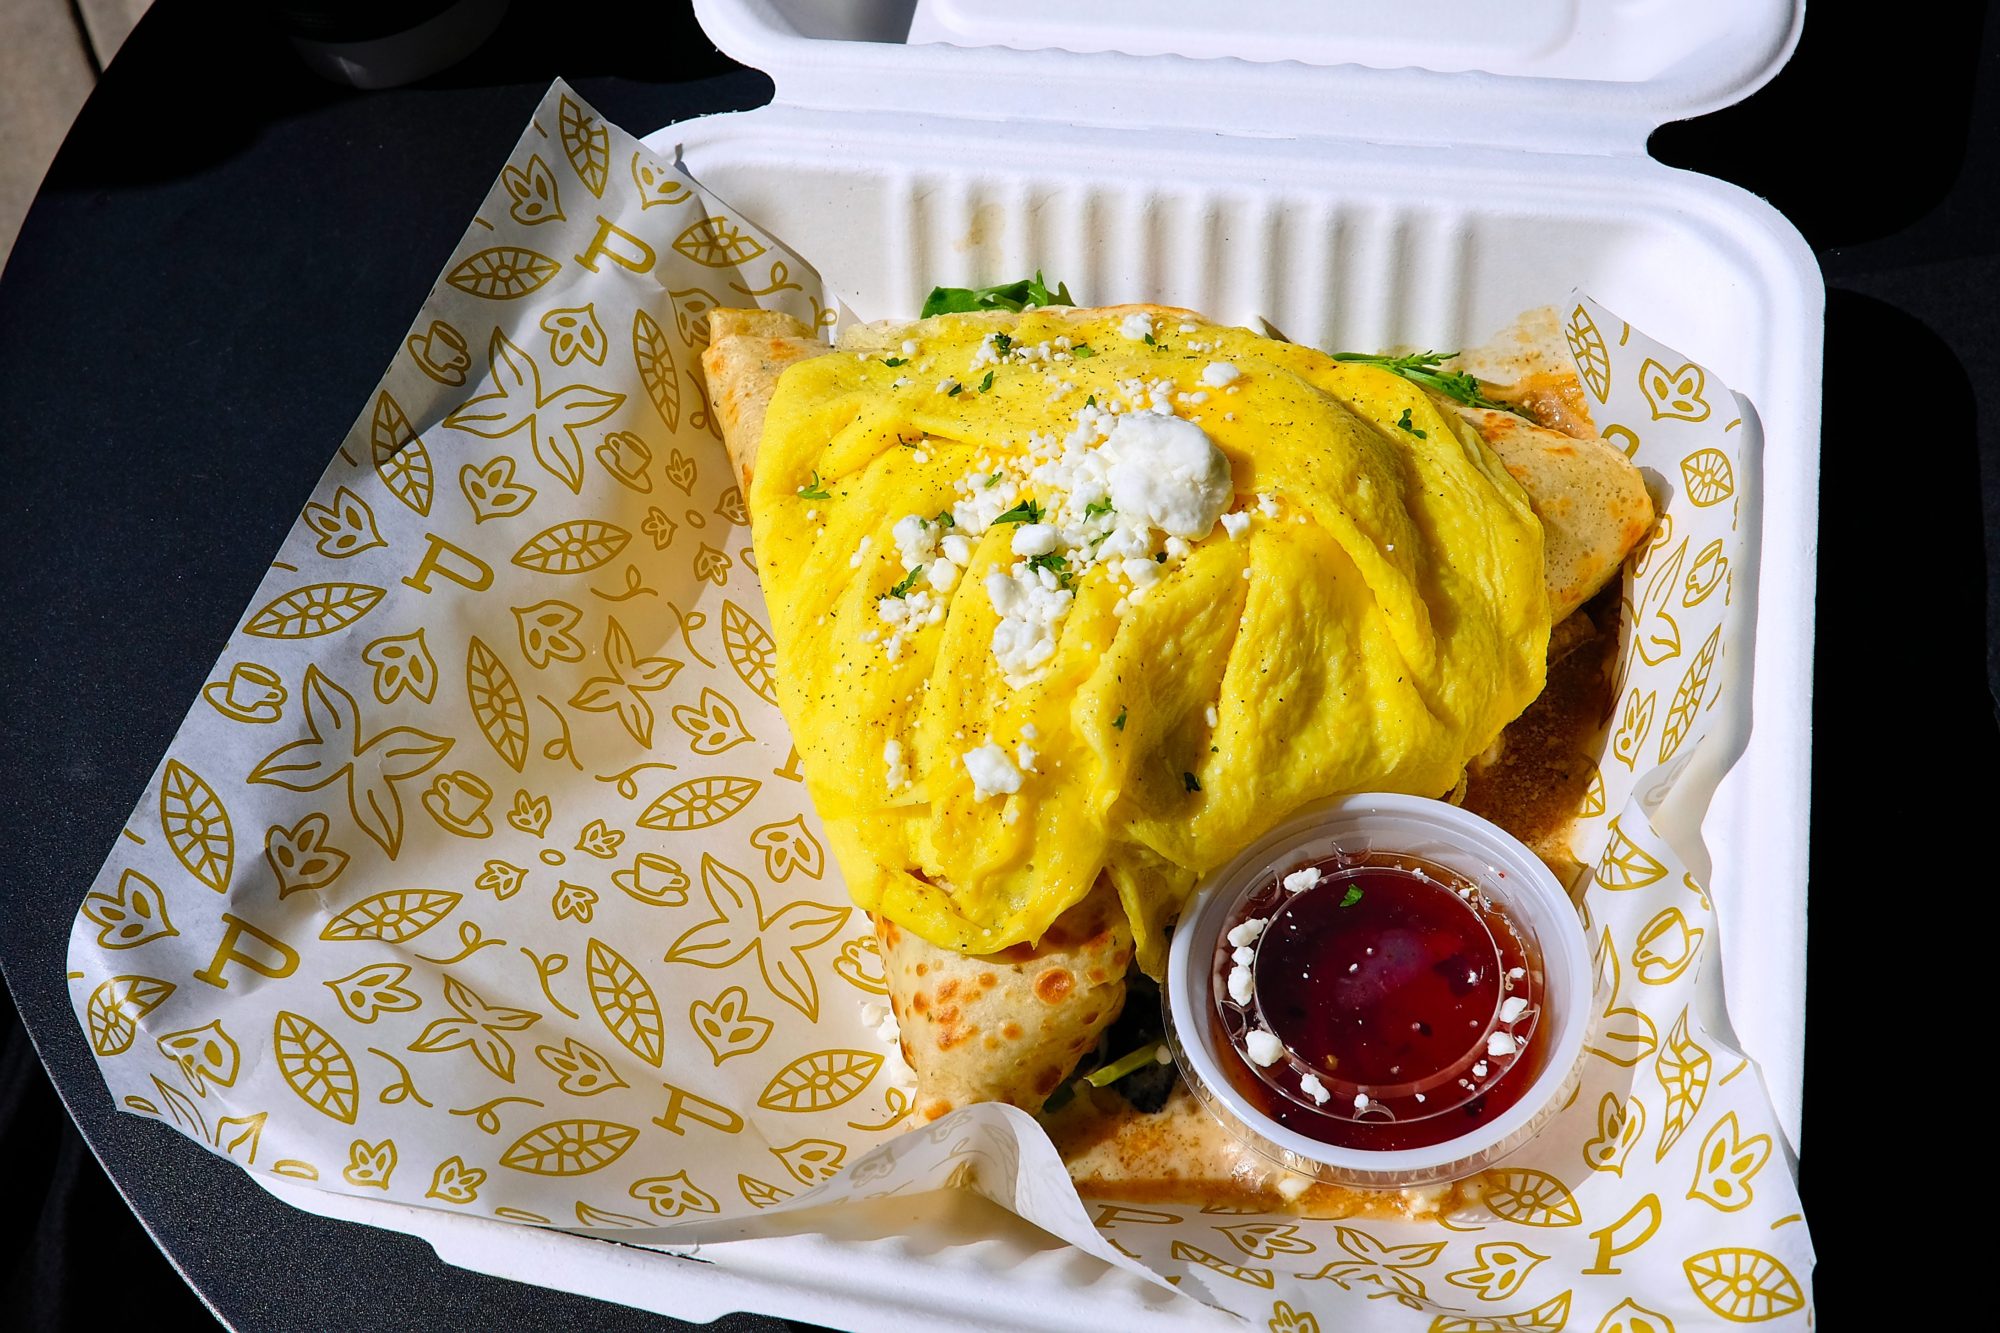 A crepe in a takeout box with an egg on top